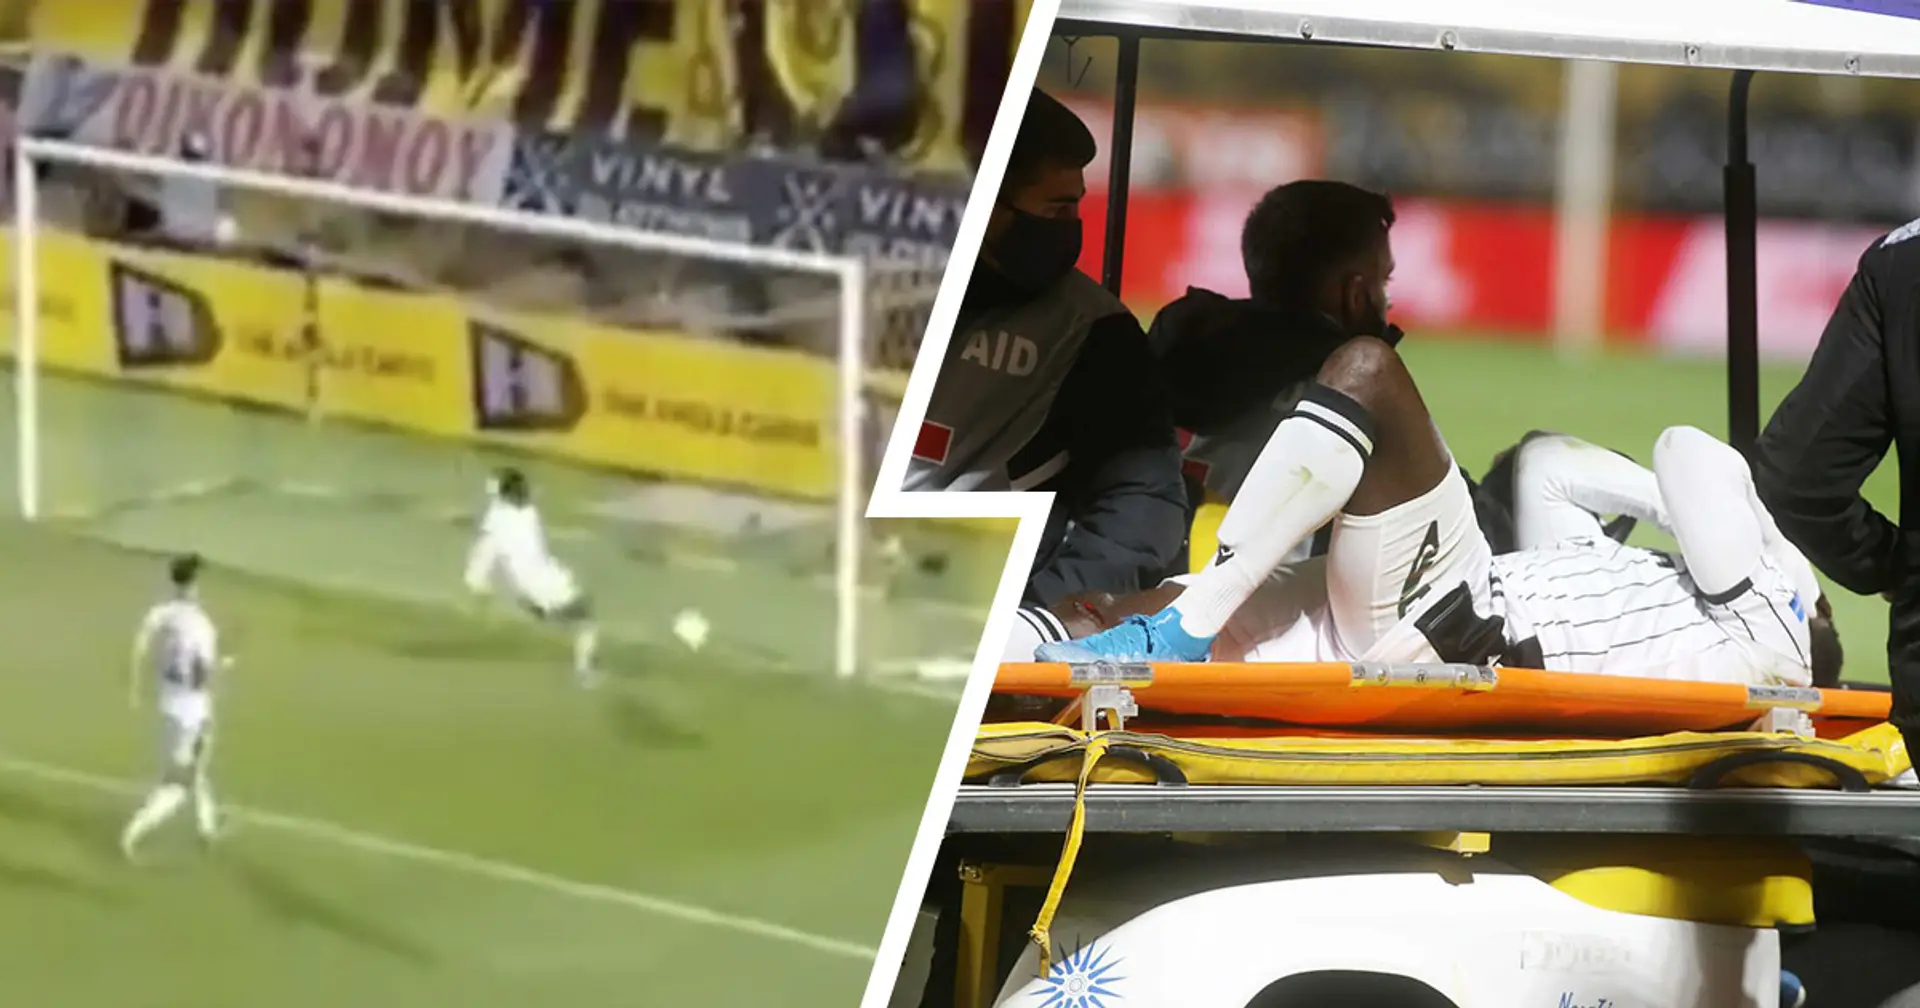 Moussa Wague's season reportedly over; Senegalese suffers serious injury after making heroic goal-line clearance for PAOK